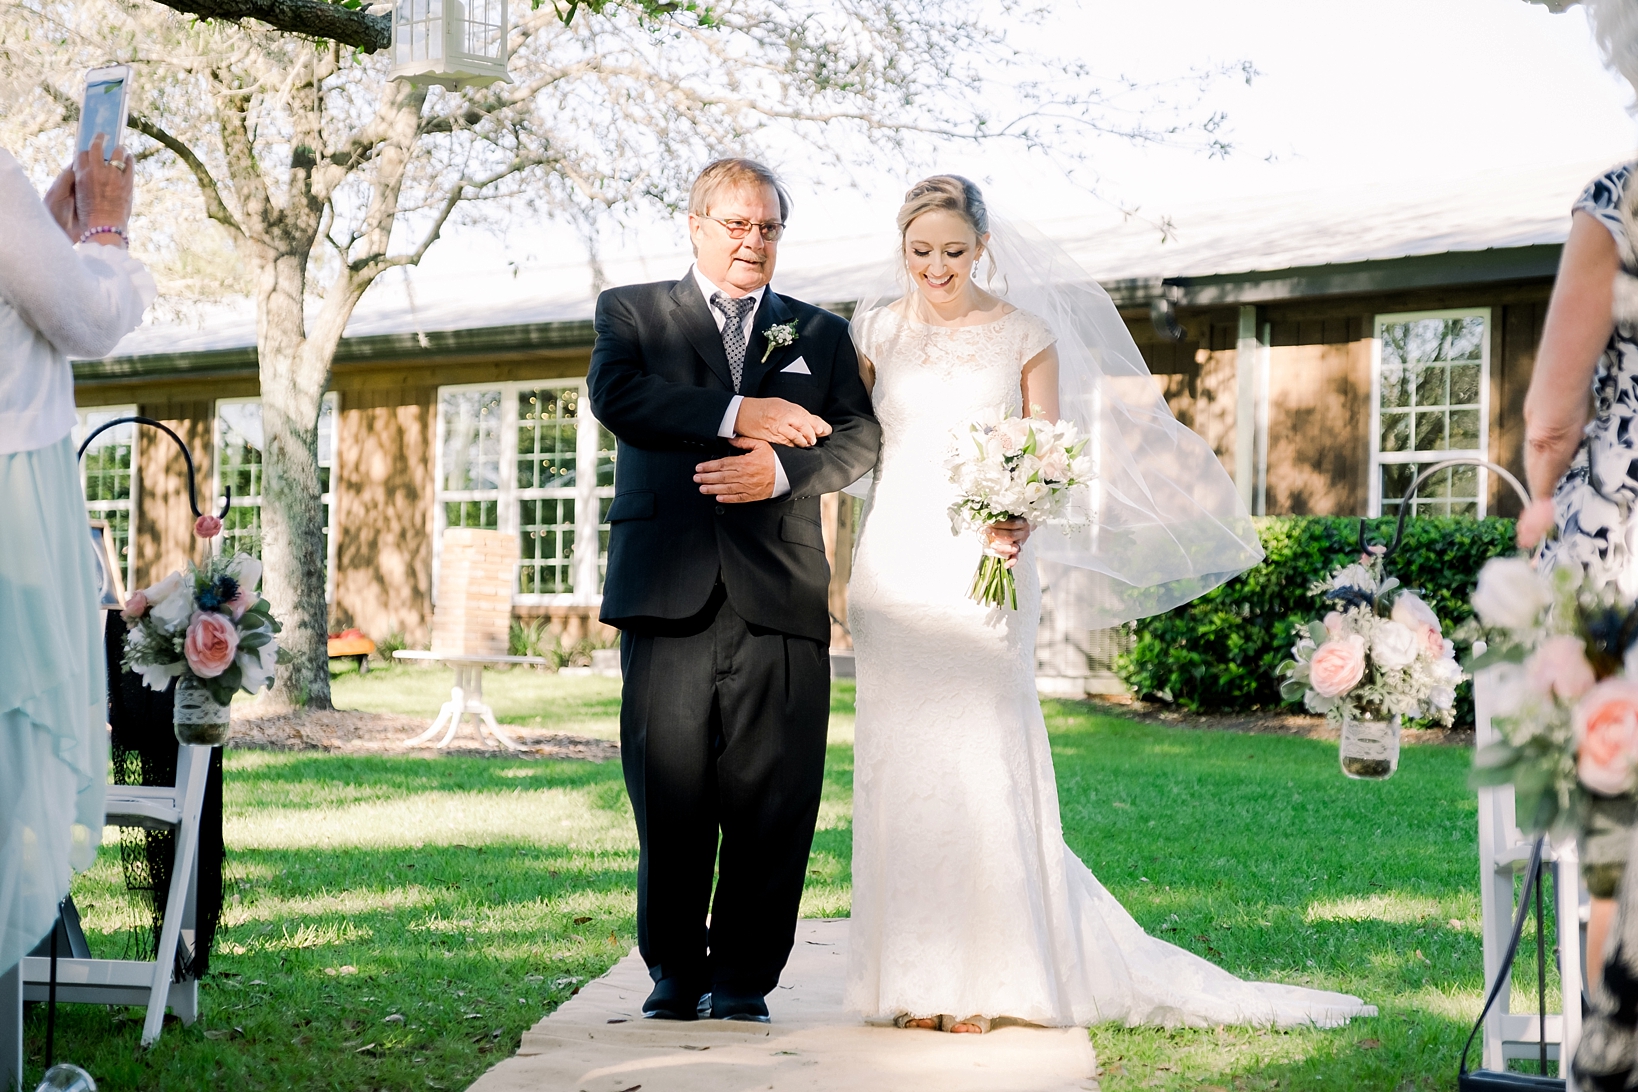 The Bride and her Dad walk down the aisle on her Cross Creek Ranch wedding day